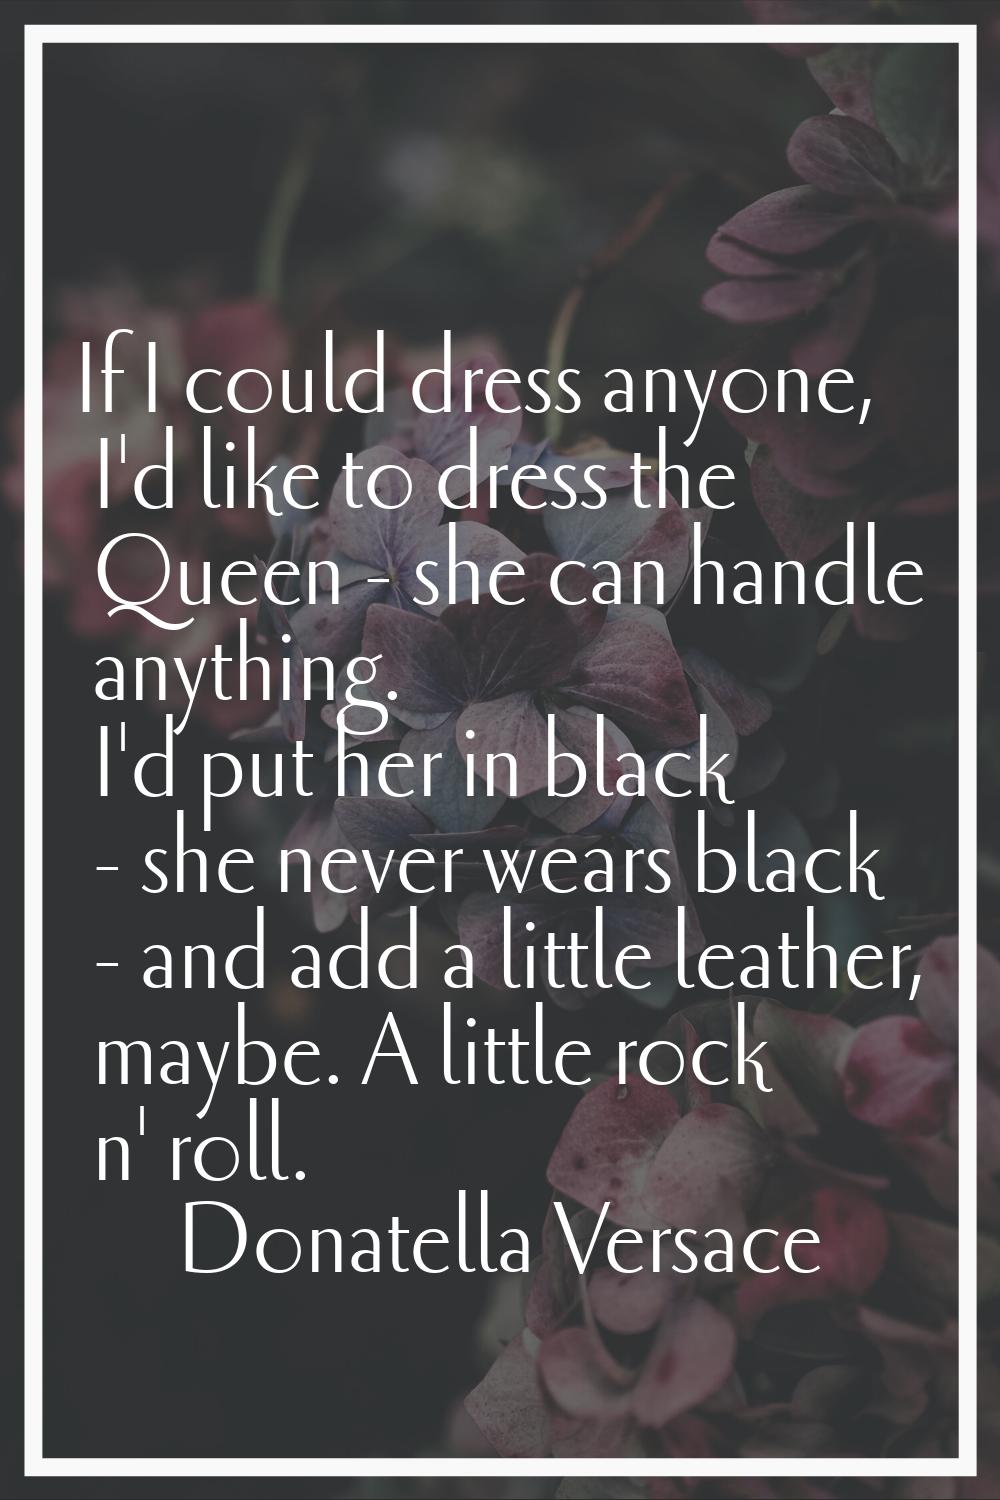 If I could dress anyone, I'd like to dress the Queen - she can handle anything. I'd put her in blac